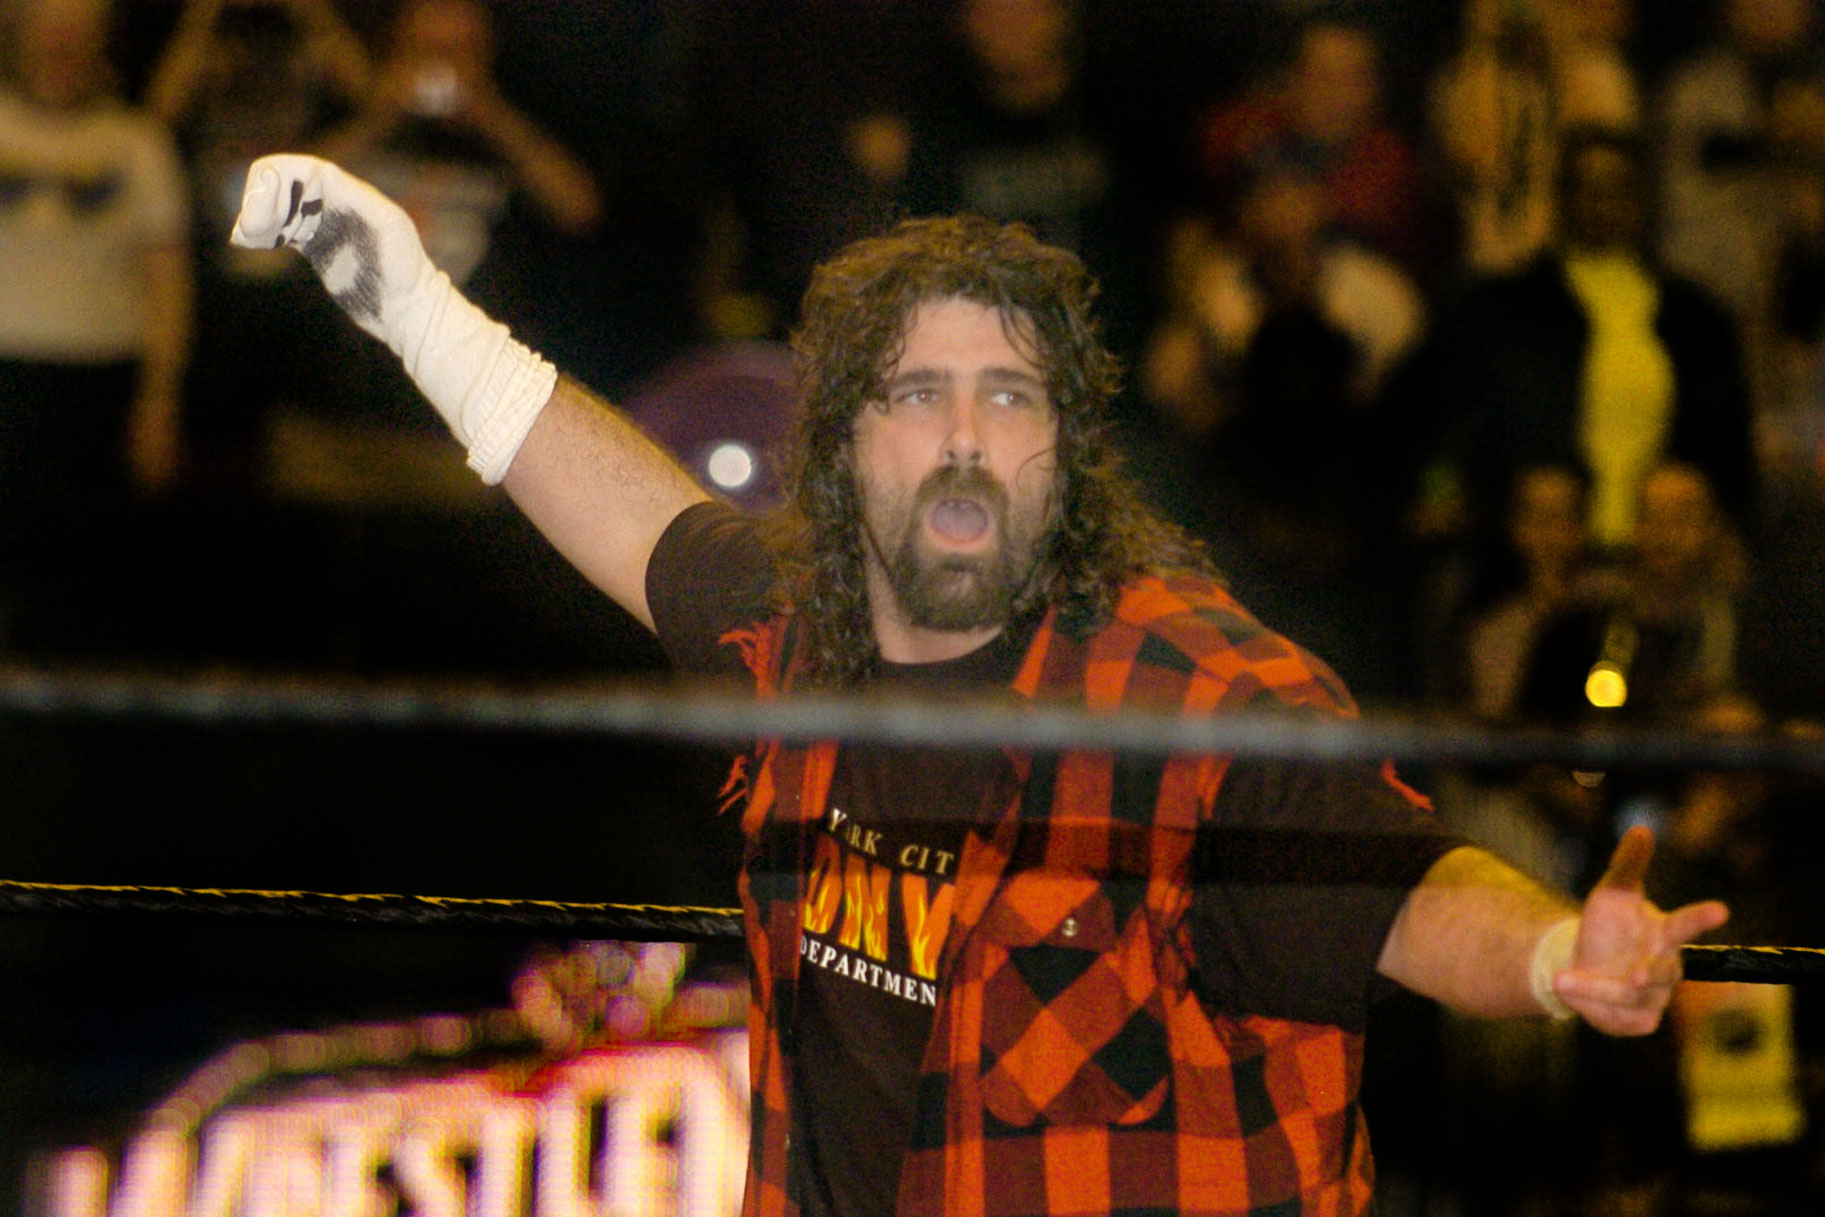 Mick Foley with his arms outstretched in the ring, wearing a sock on his right hand